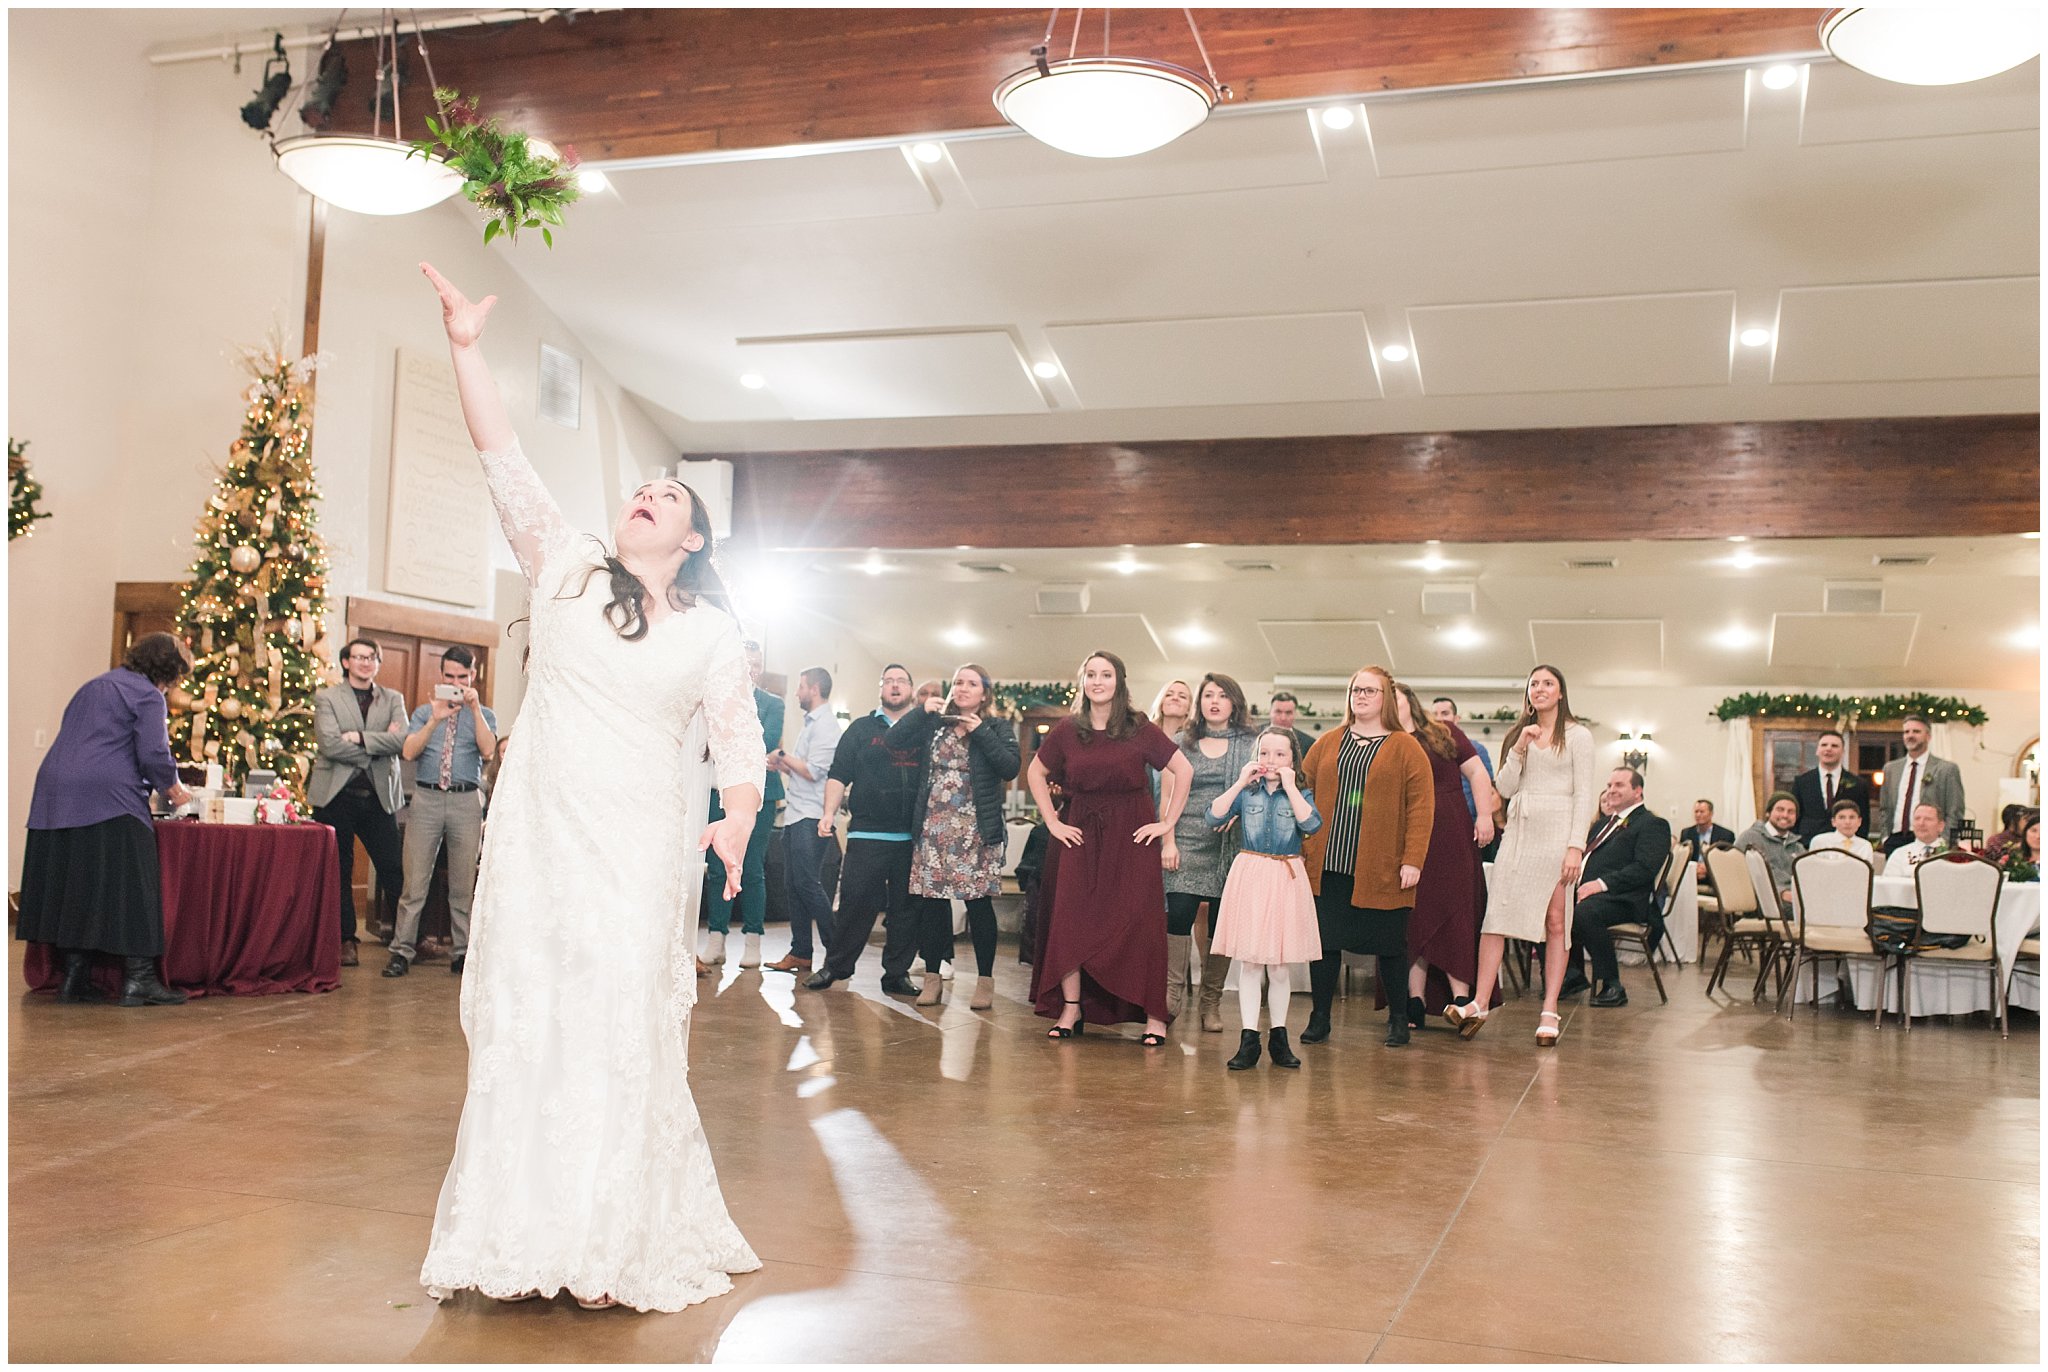 Bouquet Toss at the Gathering Place at Gardner Village | Gardner Village Wedding | The Gathering Place | Jessie and Dallin Photography